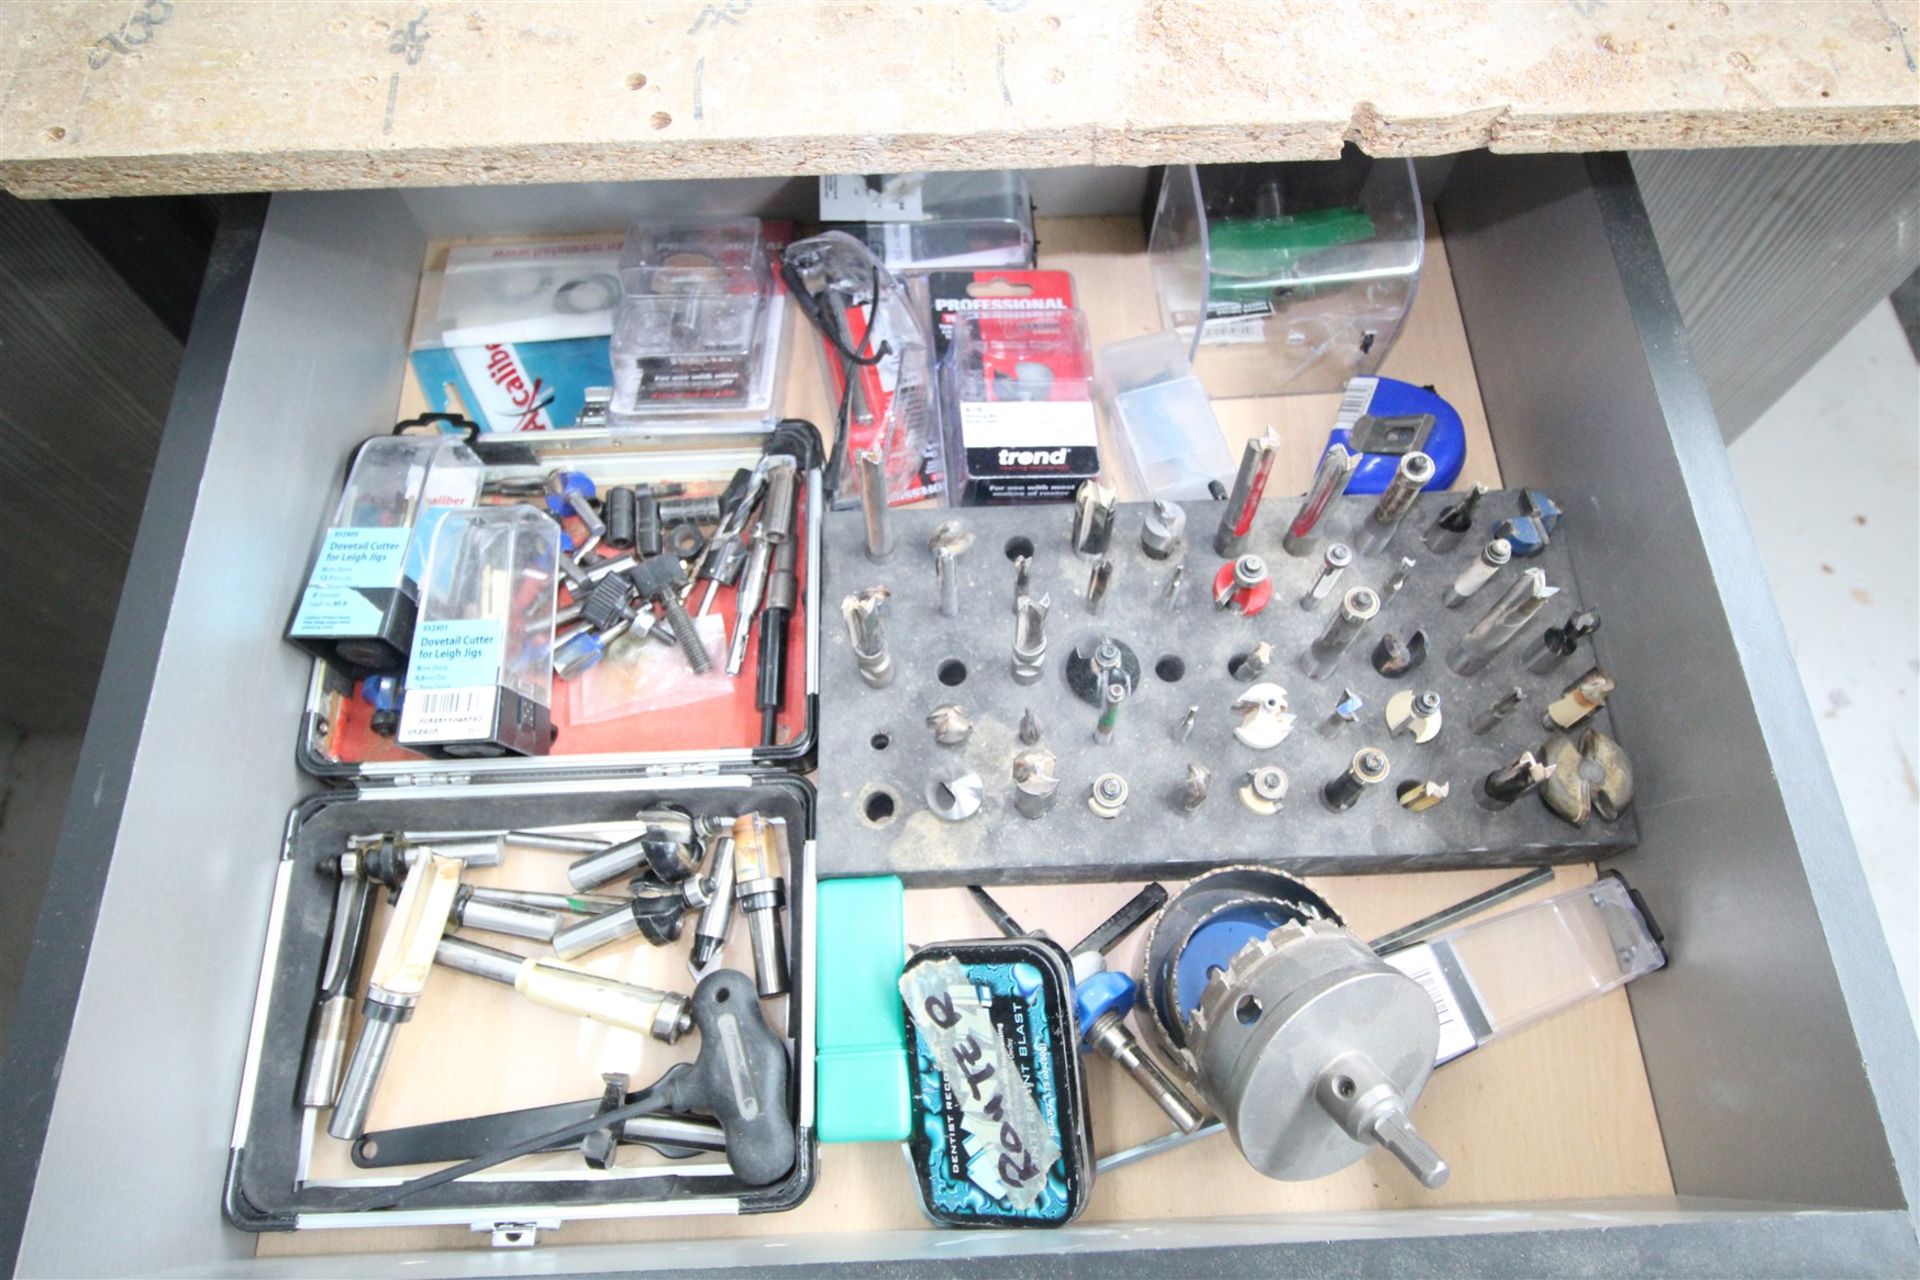 CONTENTS OF DRAWER OF ROUTER BITS